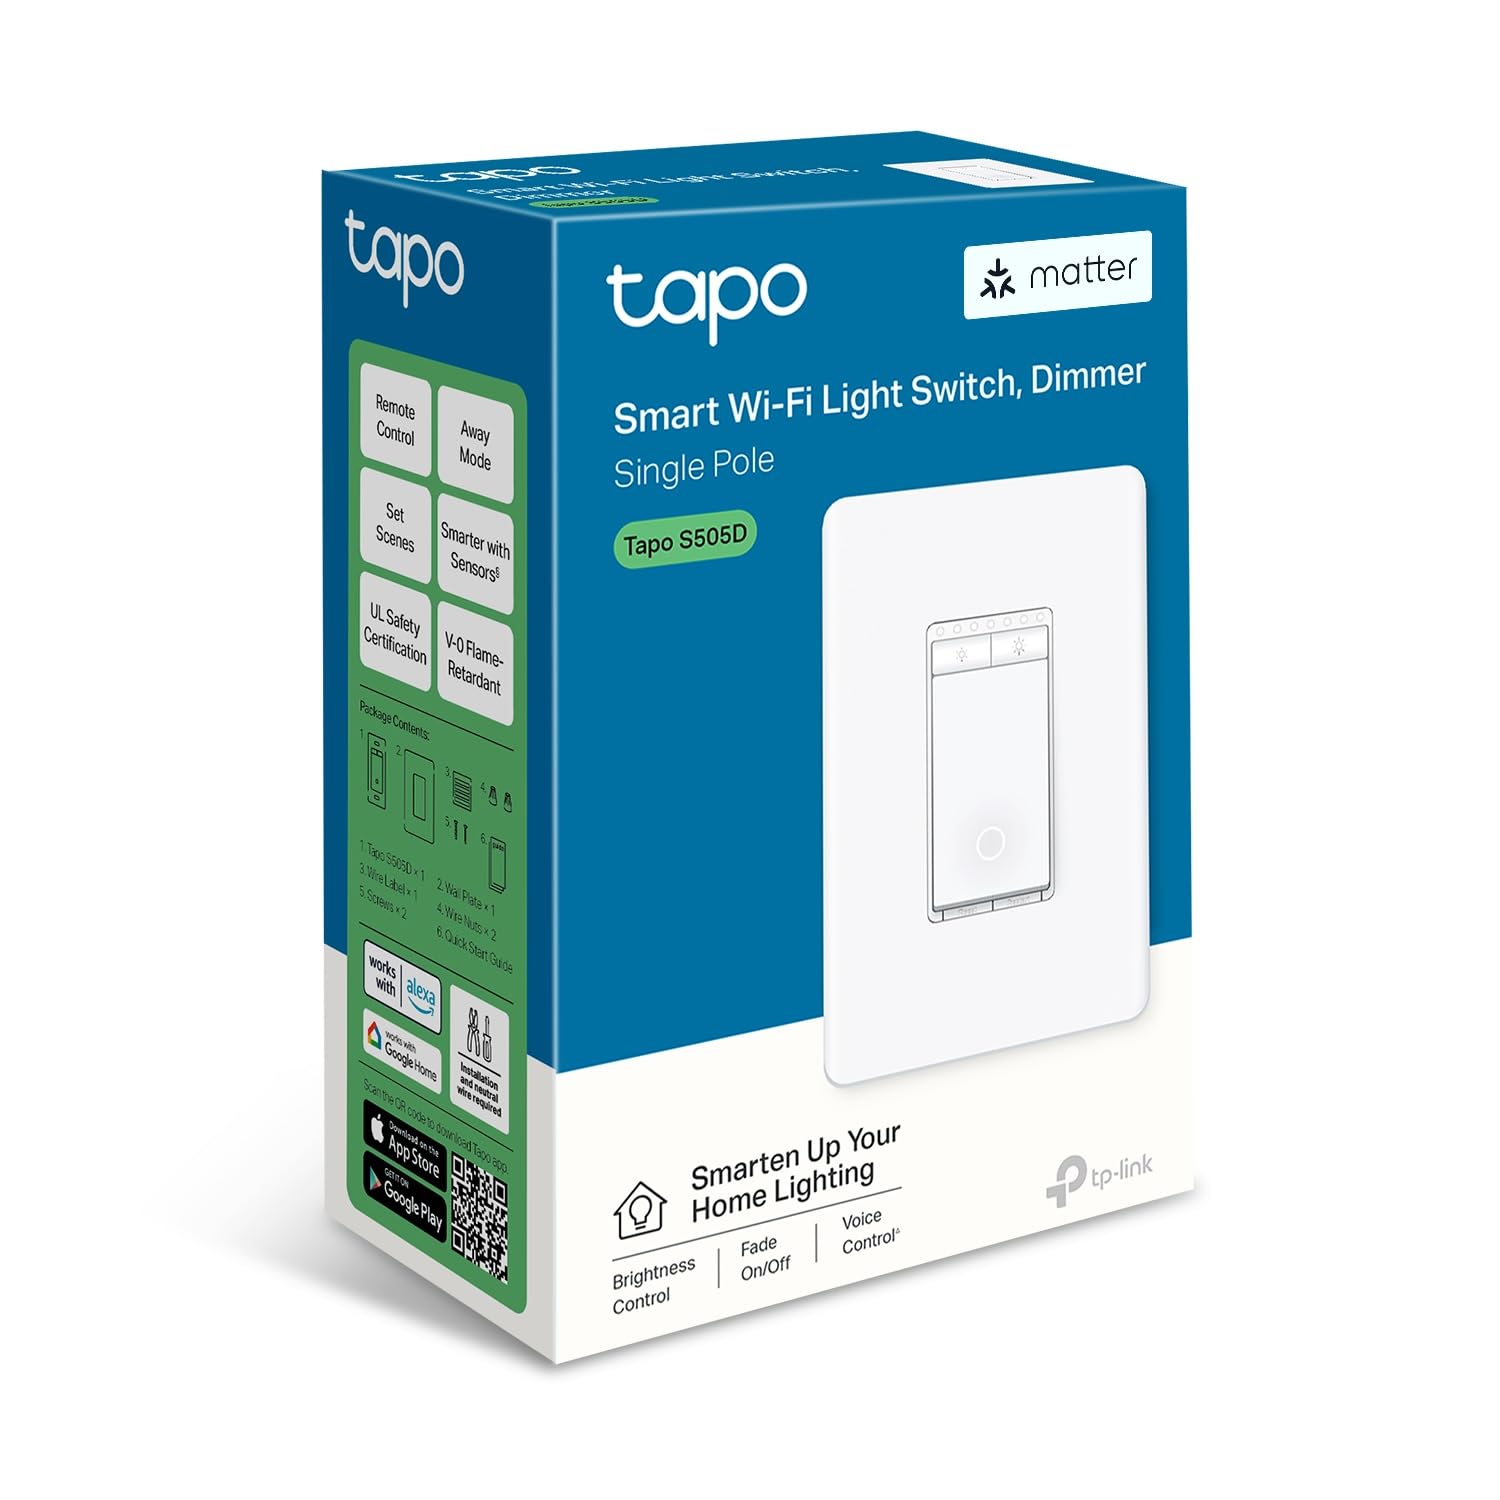 TP-Link‘s 1st Matter Smart Dimmer Switch  Single Pole Tapo S505D